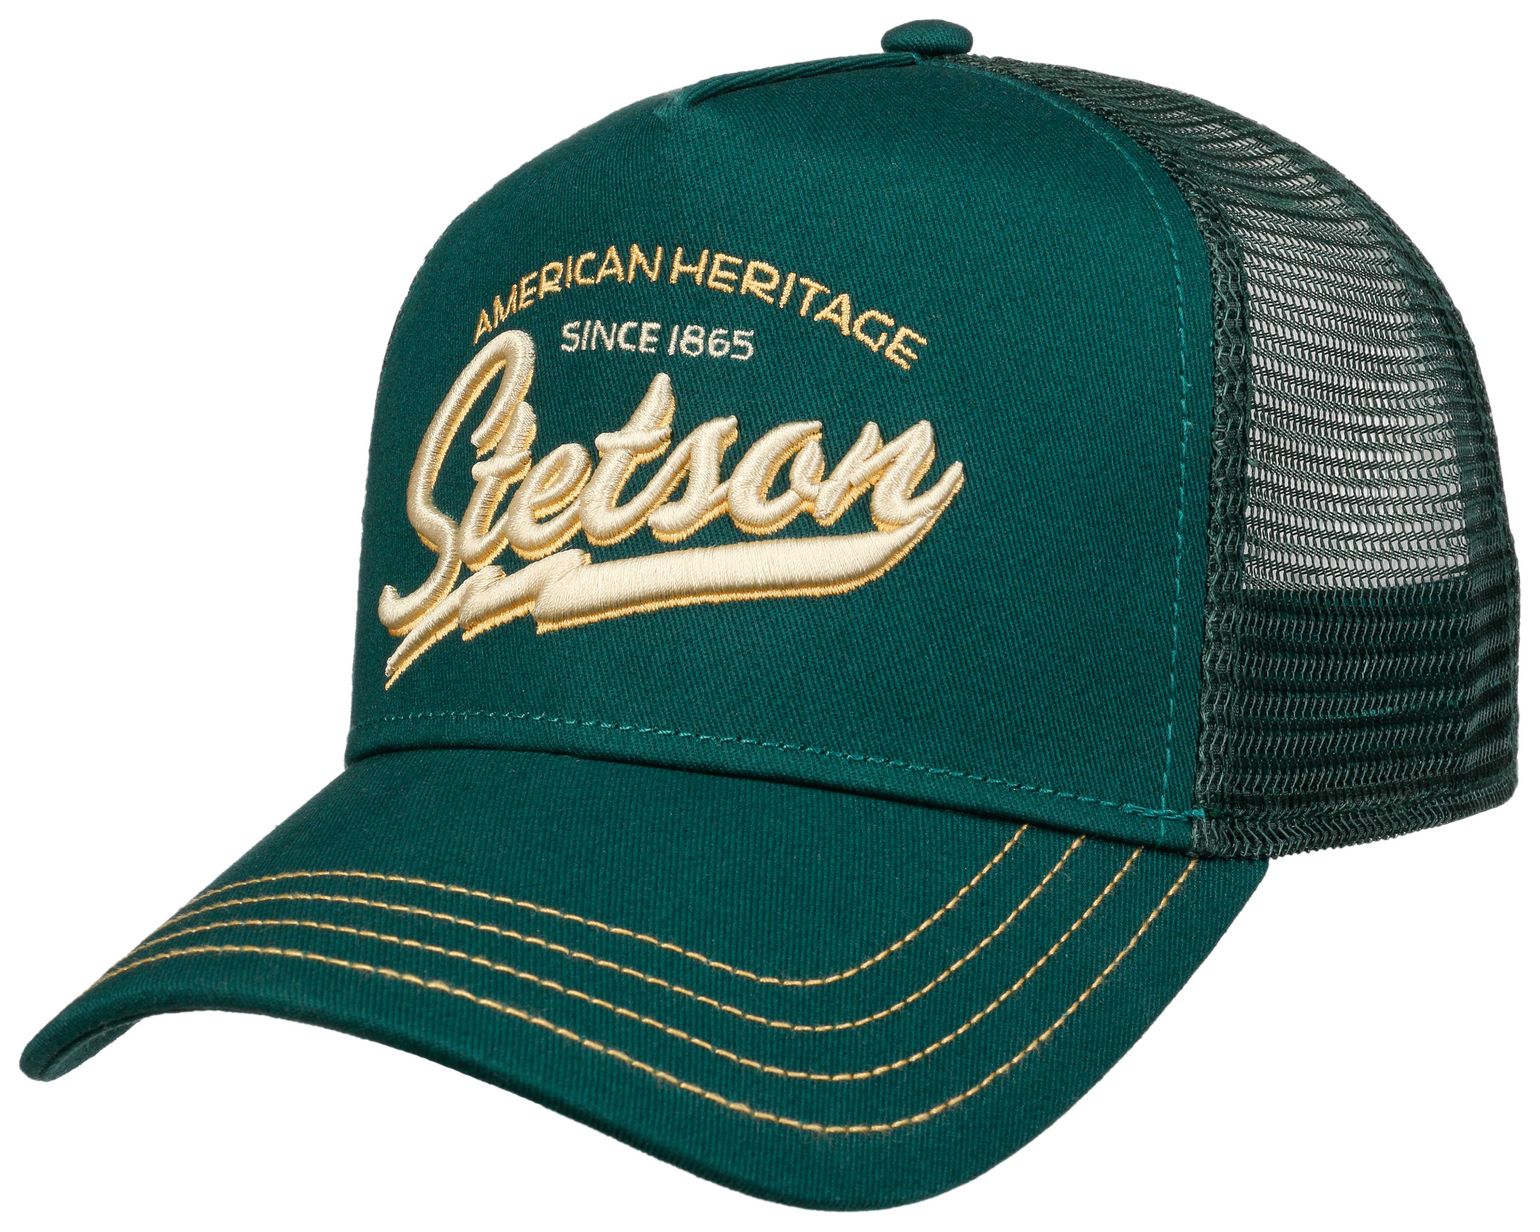 Stetson Unisex Trucker Cap American Heritage Classic Washed Green